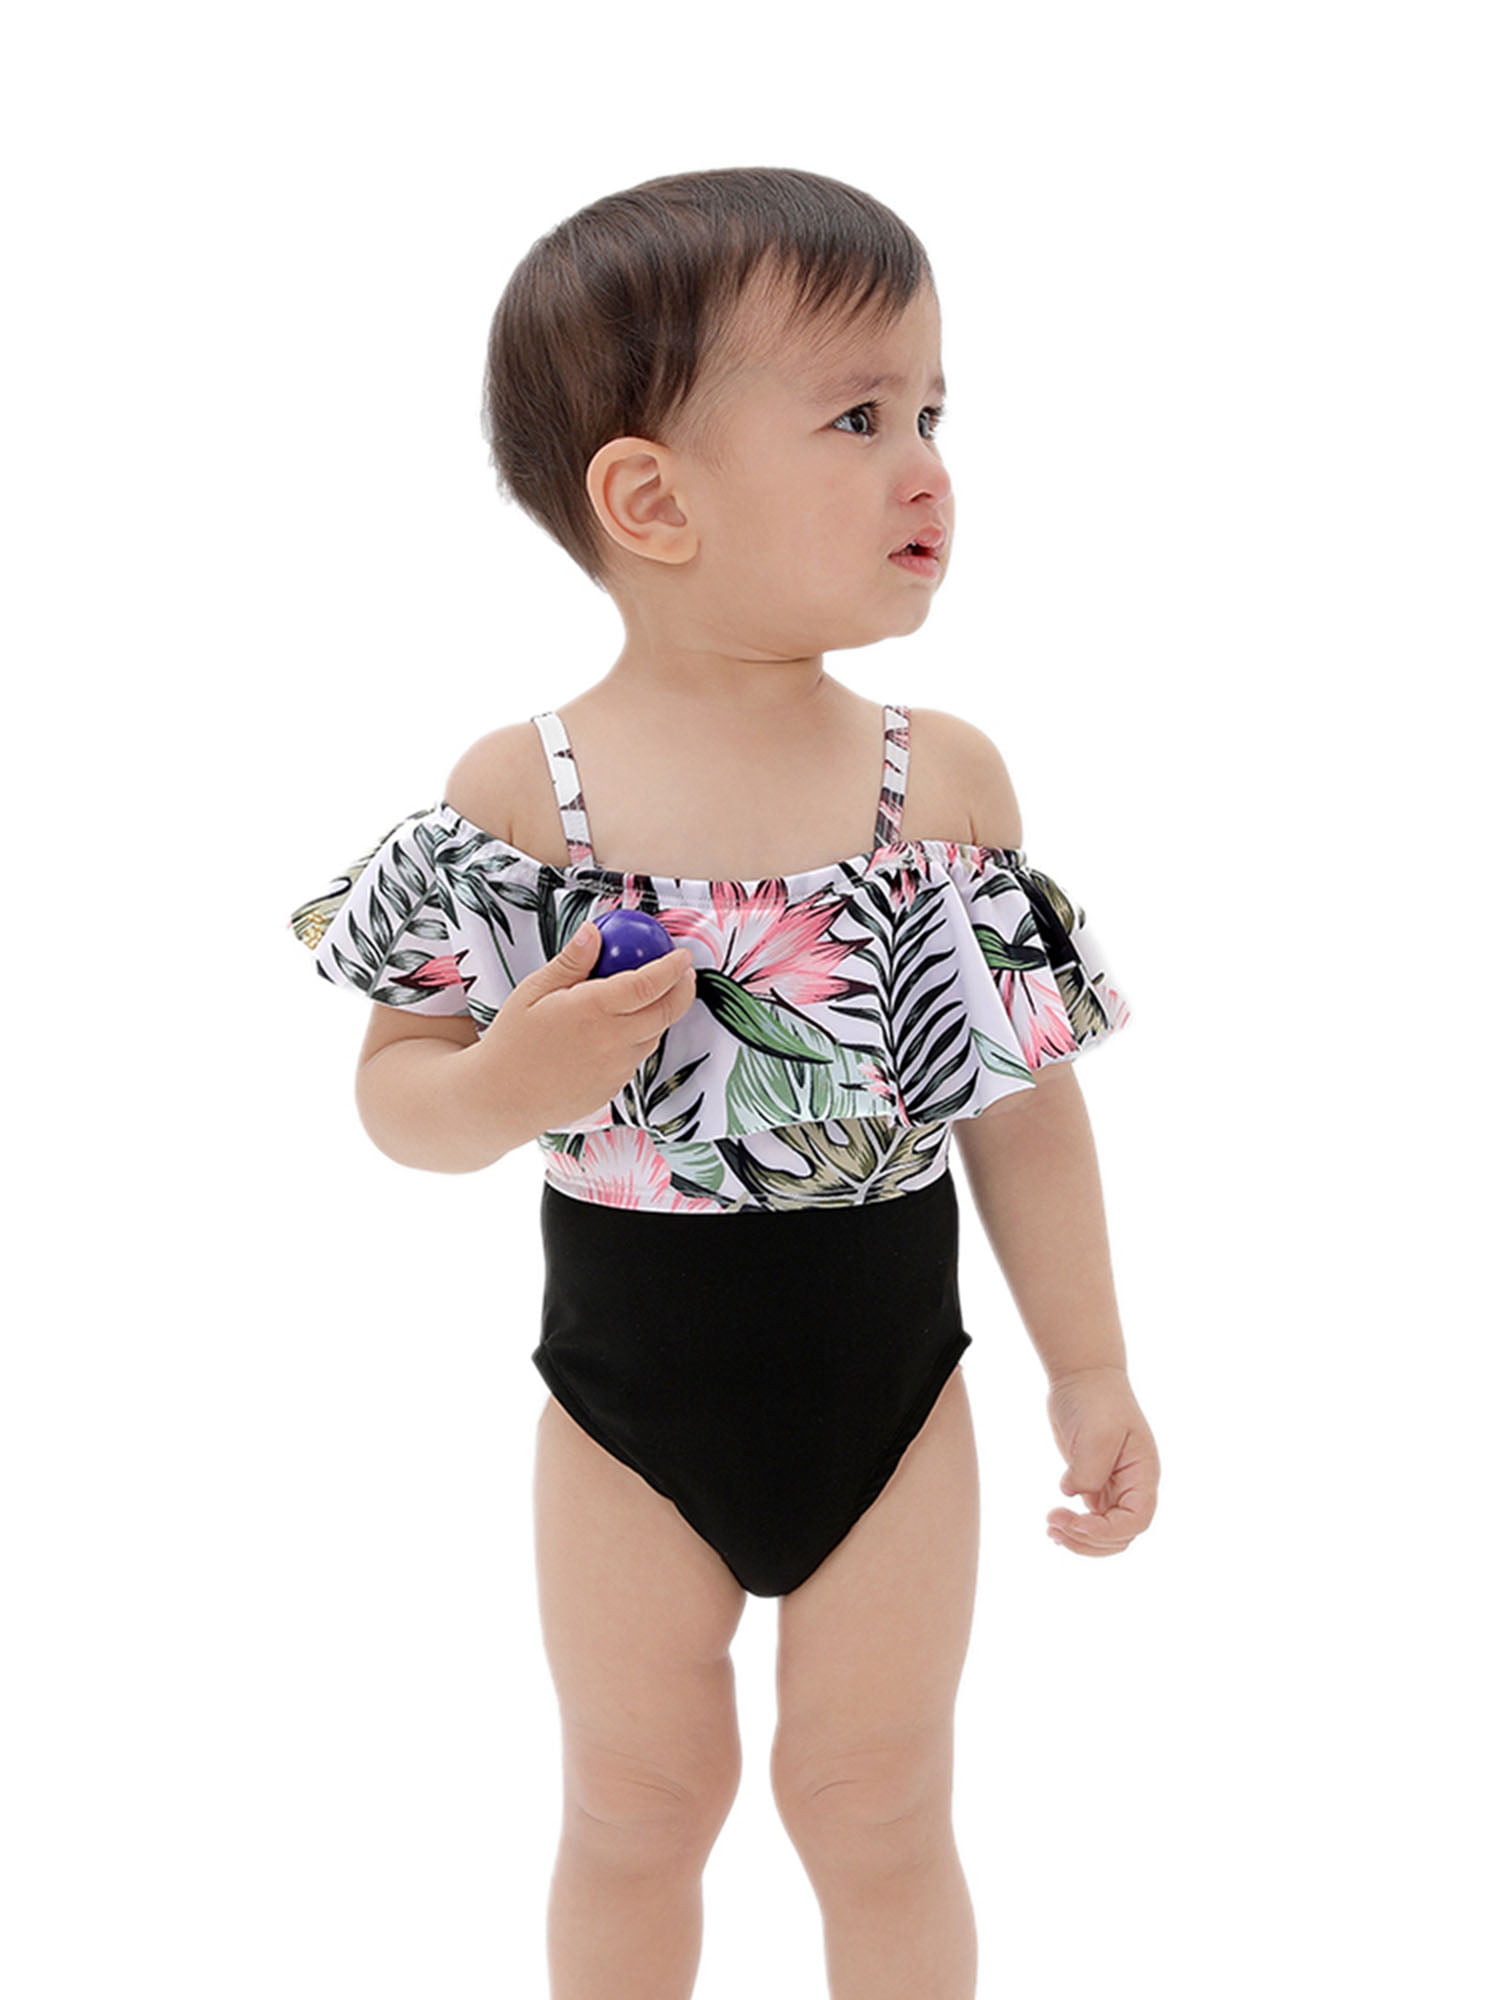 Wet or dry All-day UPF 50 Sun Protection Baby One-Piece Swim Sunsuit i play